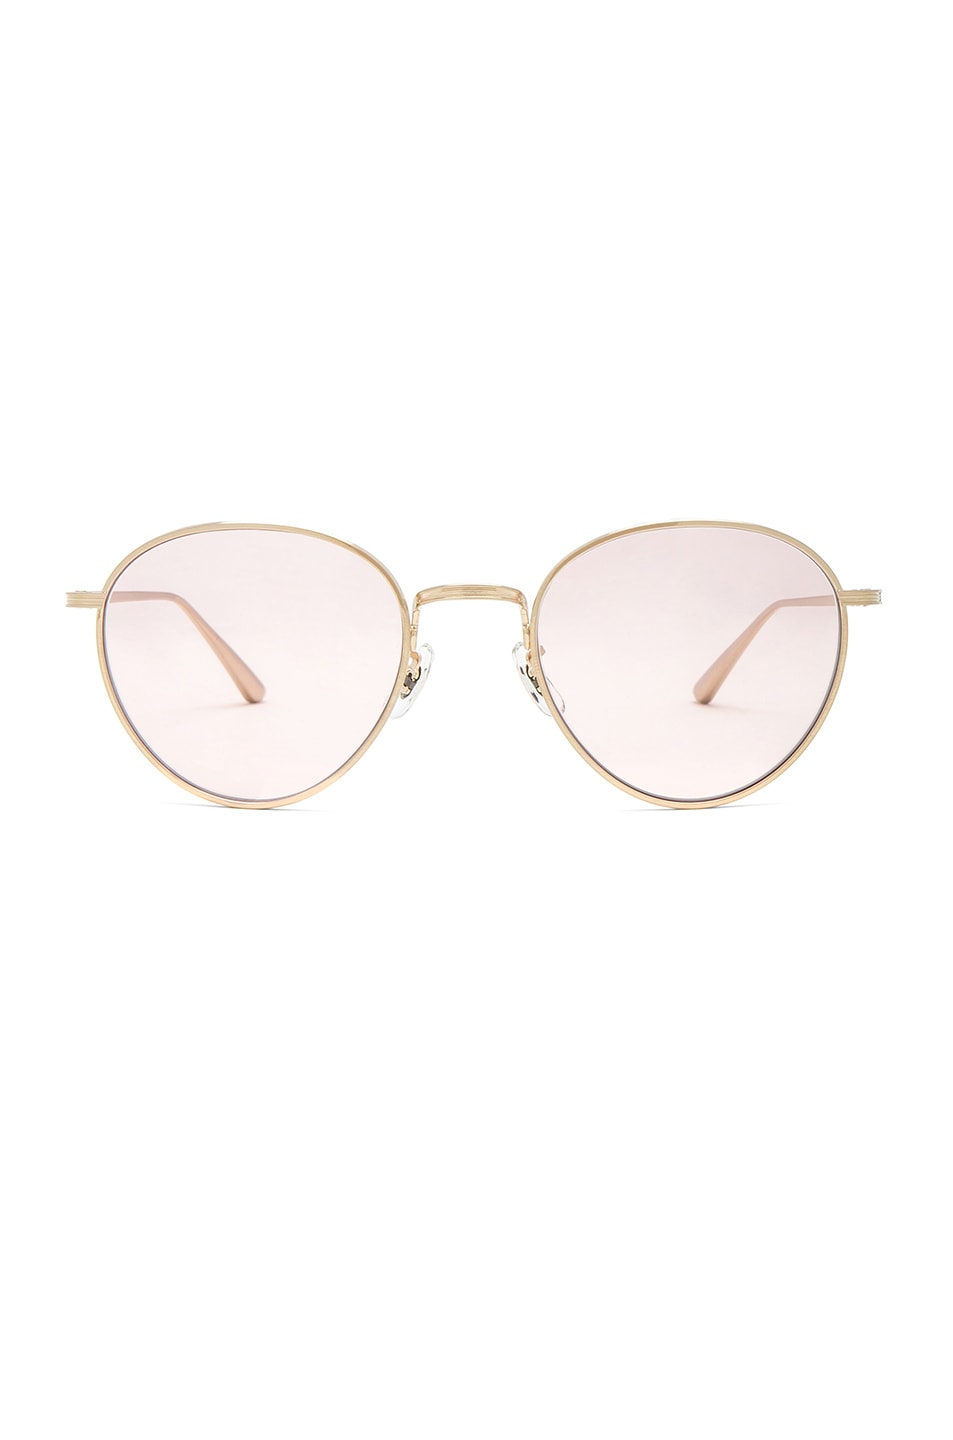 Image 1 of Oliver Peoples x The Row Brownstone 2 Sunglasses in Brushed Gold & Pink Wash